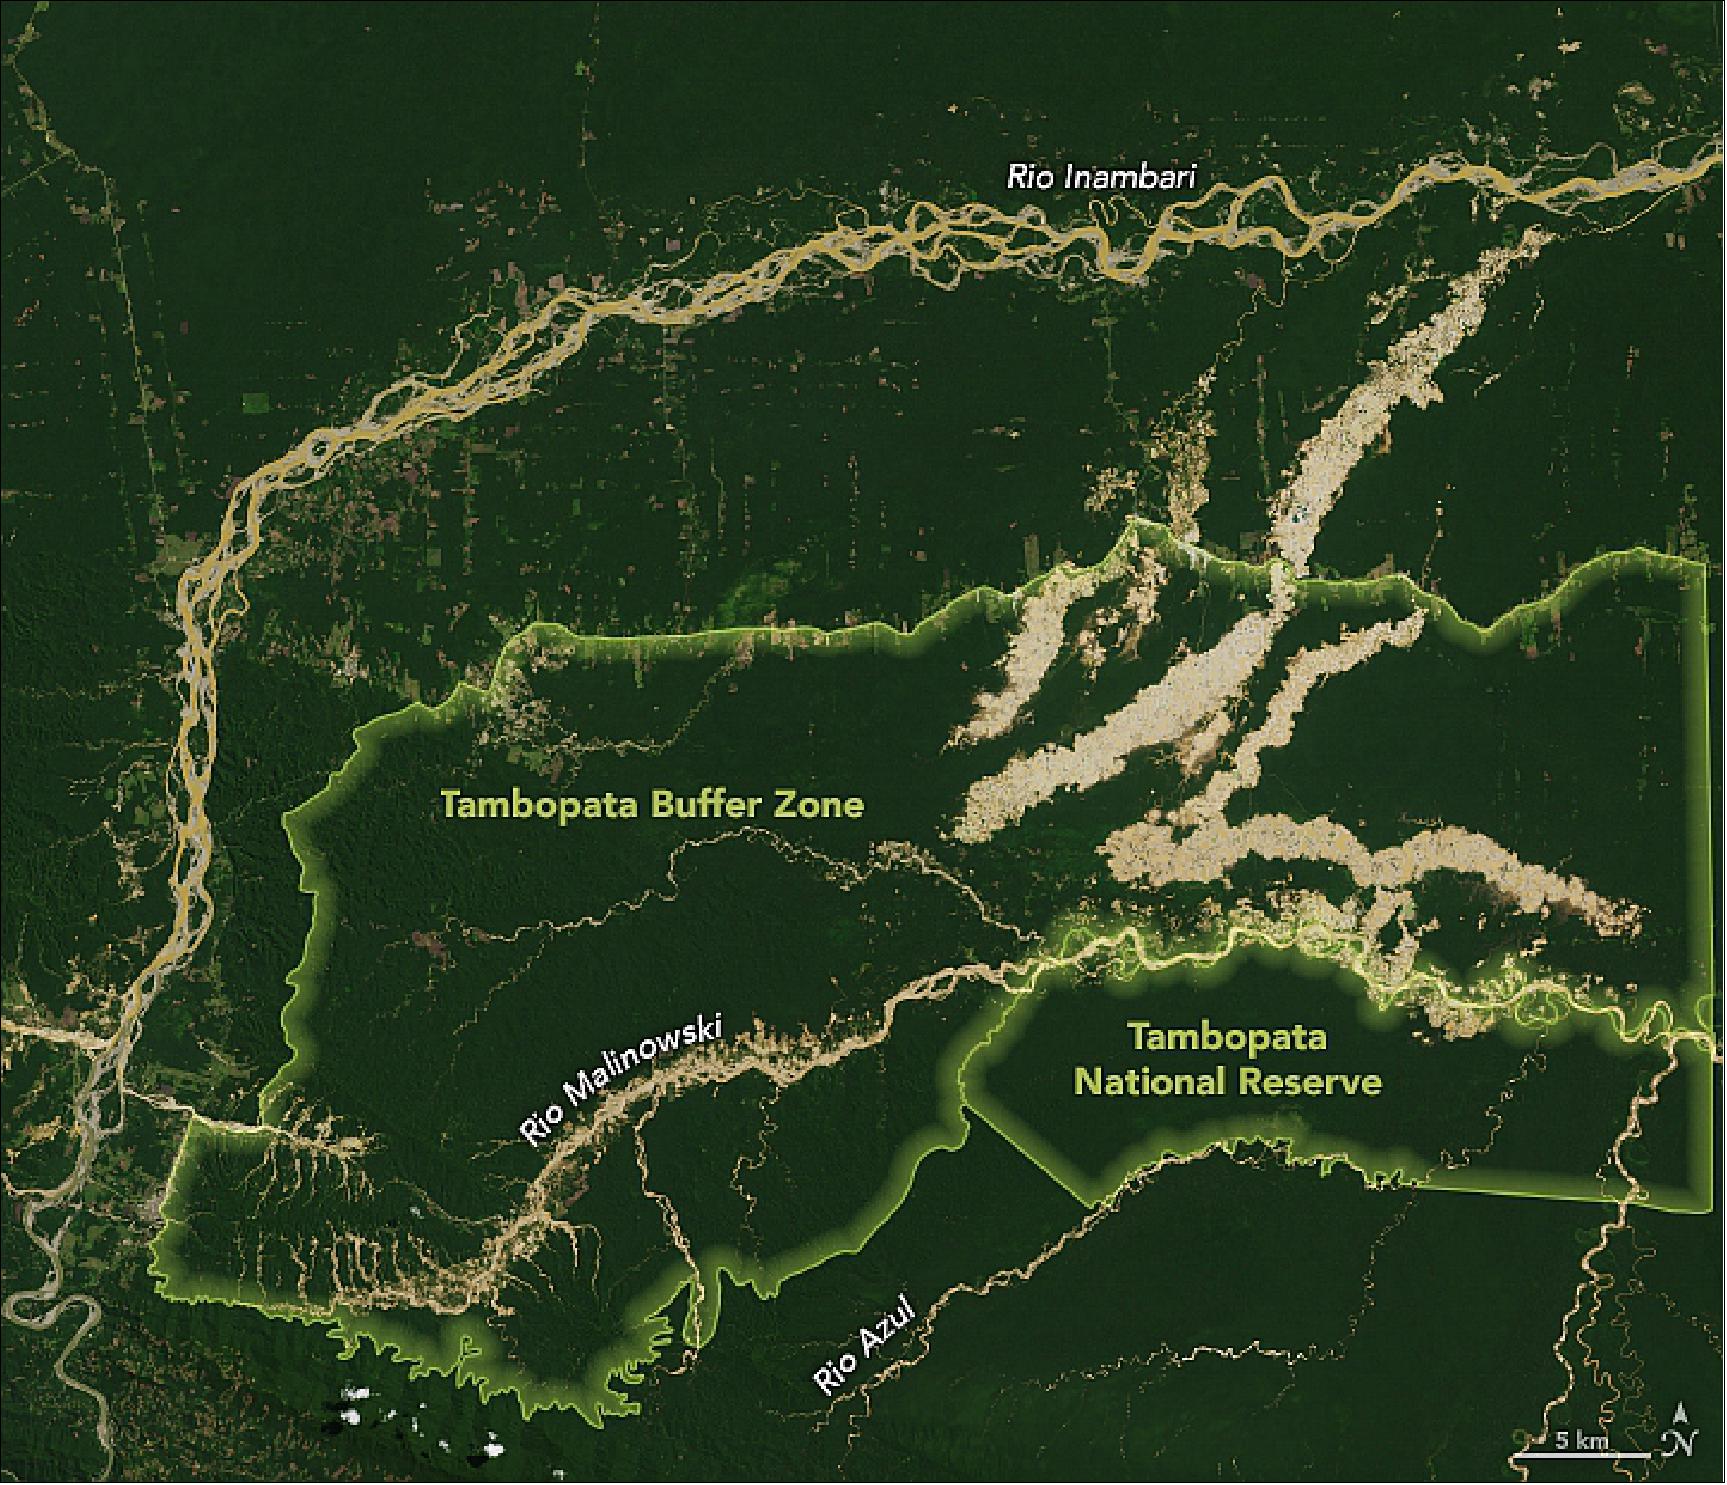 Figure 13: Designations of regions and rivers of Figure 12. This image was acquired by Landsat-8 on 6 September 2018 (image credit: NASA Earth Observatory, images by Joshua Stevens, using Landsat data from the U.S. Geological Survey and the SERVIR Science Team. Story by Andrea Nicolau, Andi Thomas, and Leah Kucera, NASA SERVIR Science Coordination Office at the University of Alabama in Huntsville)